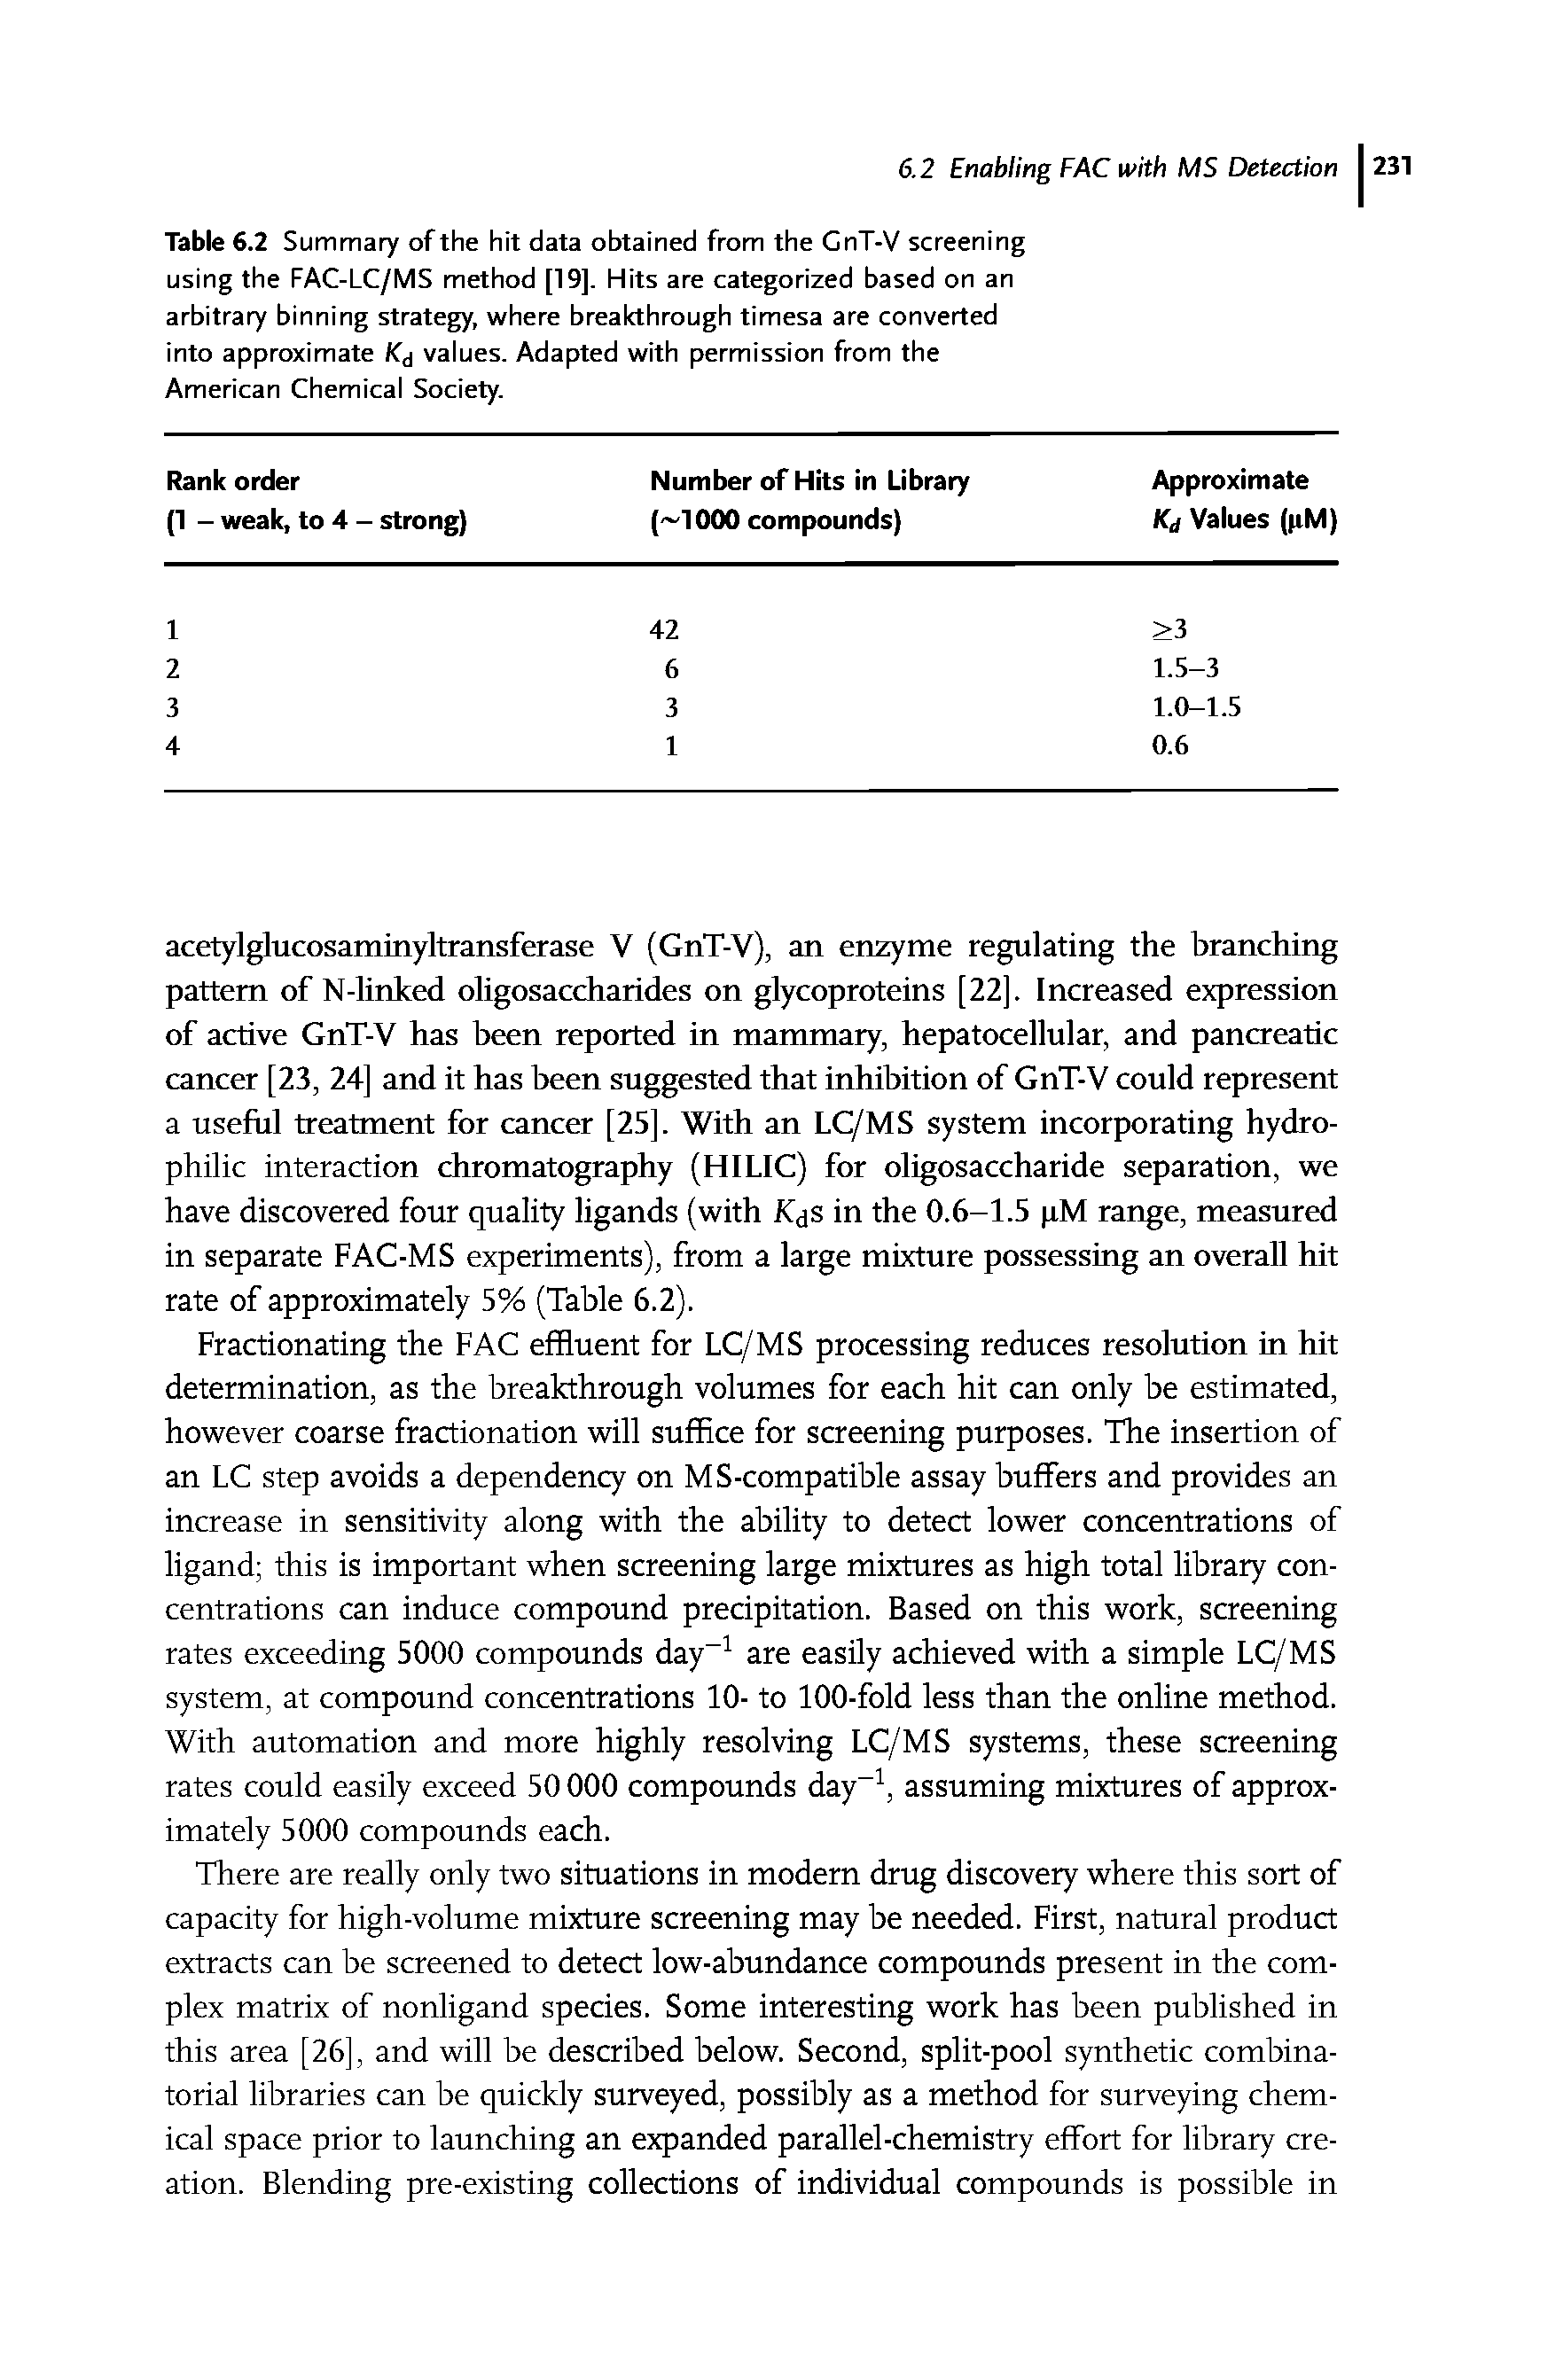 Table 6.2 Summary of the hit data obtained from the CnT-V screening using the FAC-LC/MS method [19], Hits are categorized based on an arbitrary binning strategy, where breakthrough timesa are converted into approximate (fj values. Adapted with permission from the American Chemical Society.